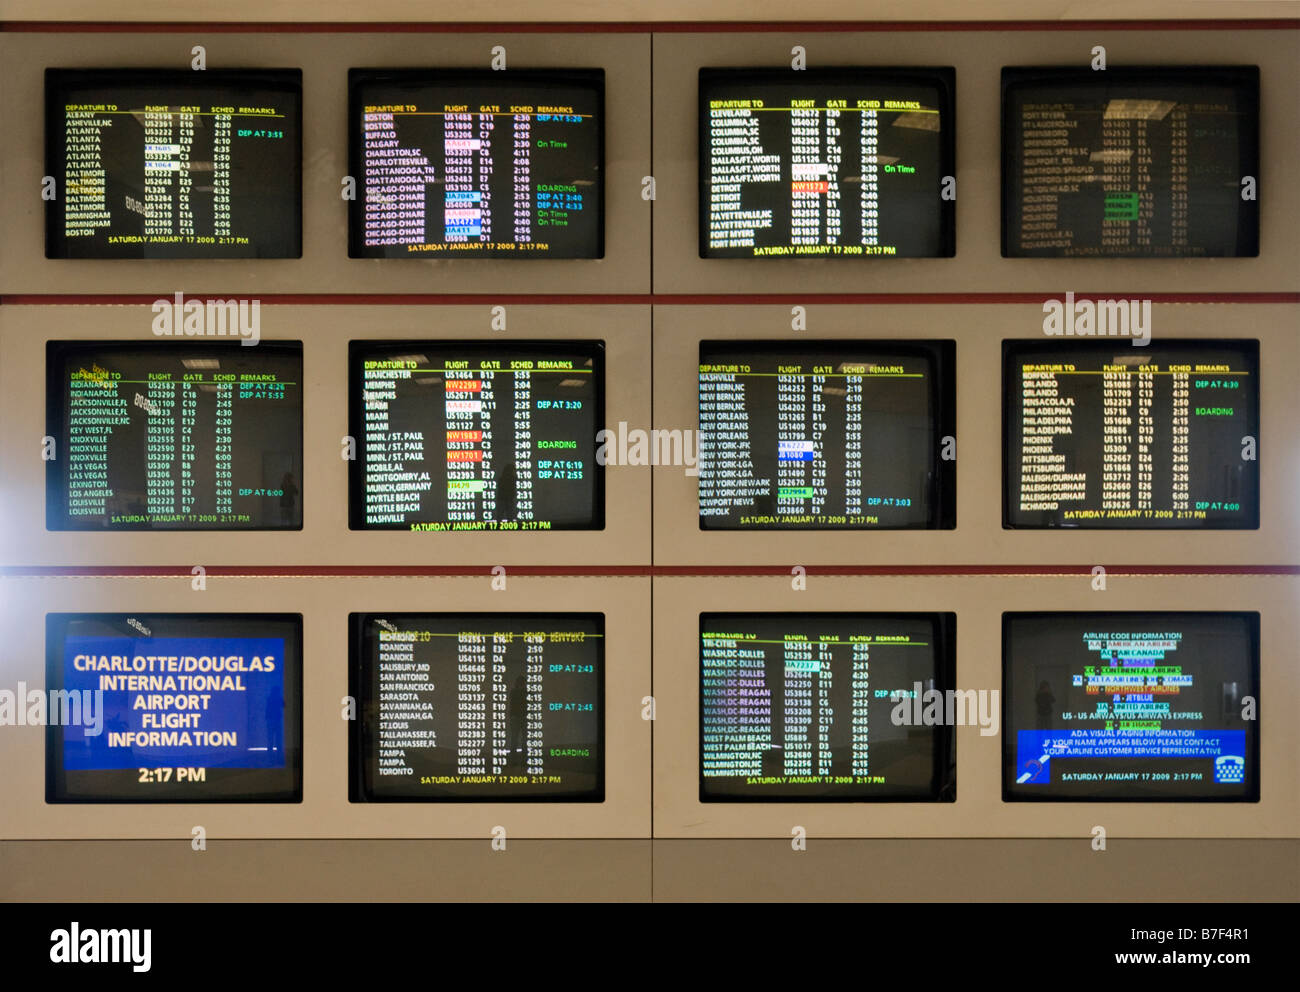 Airline Arrival and Departure Schedules on CRT Monitors Stock Photo